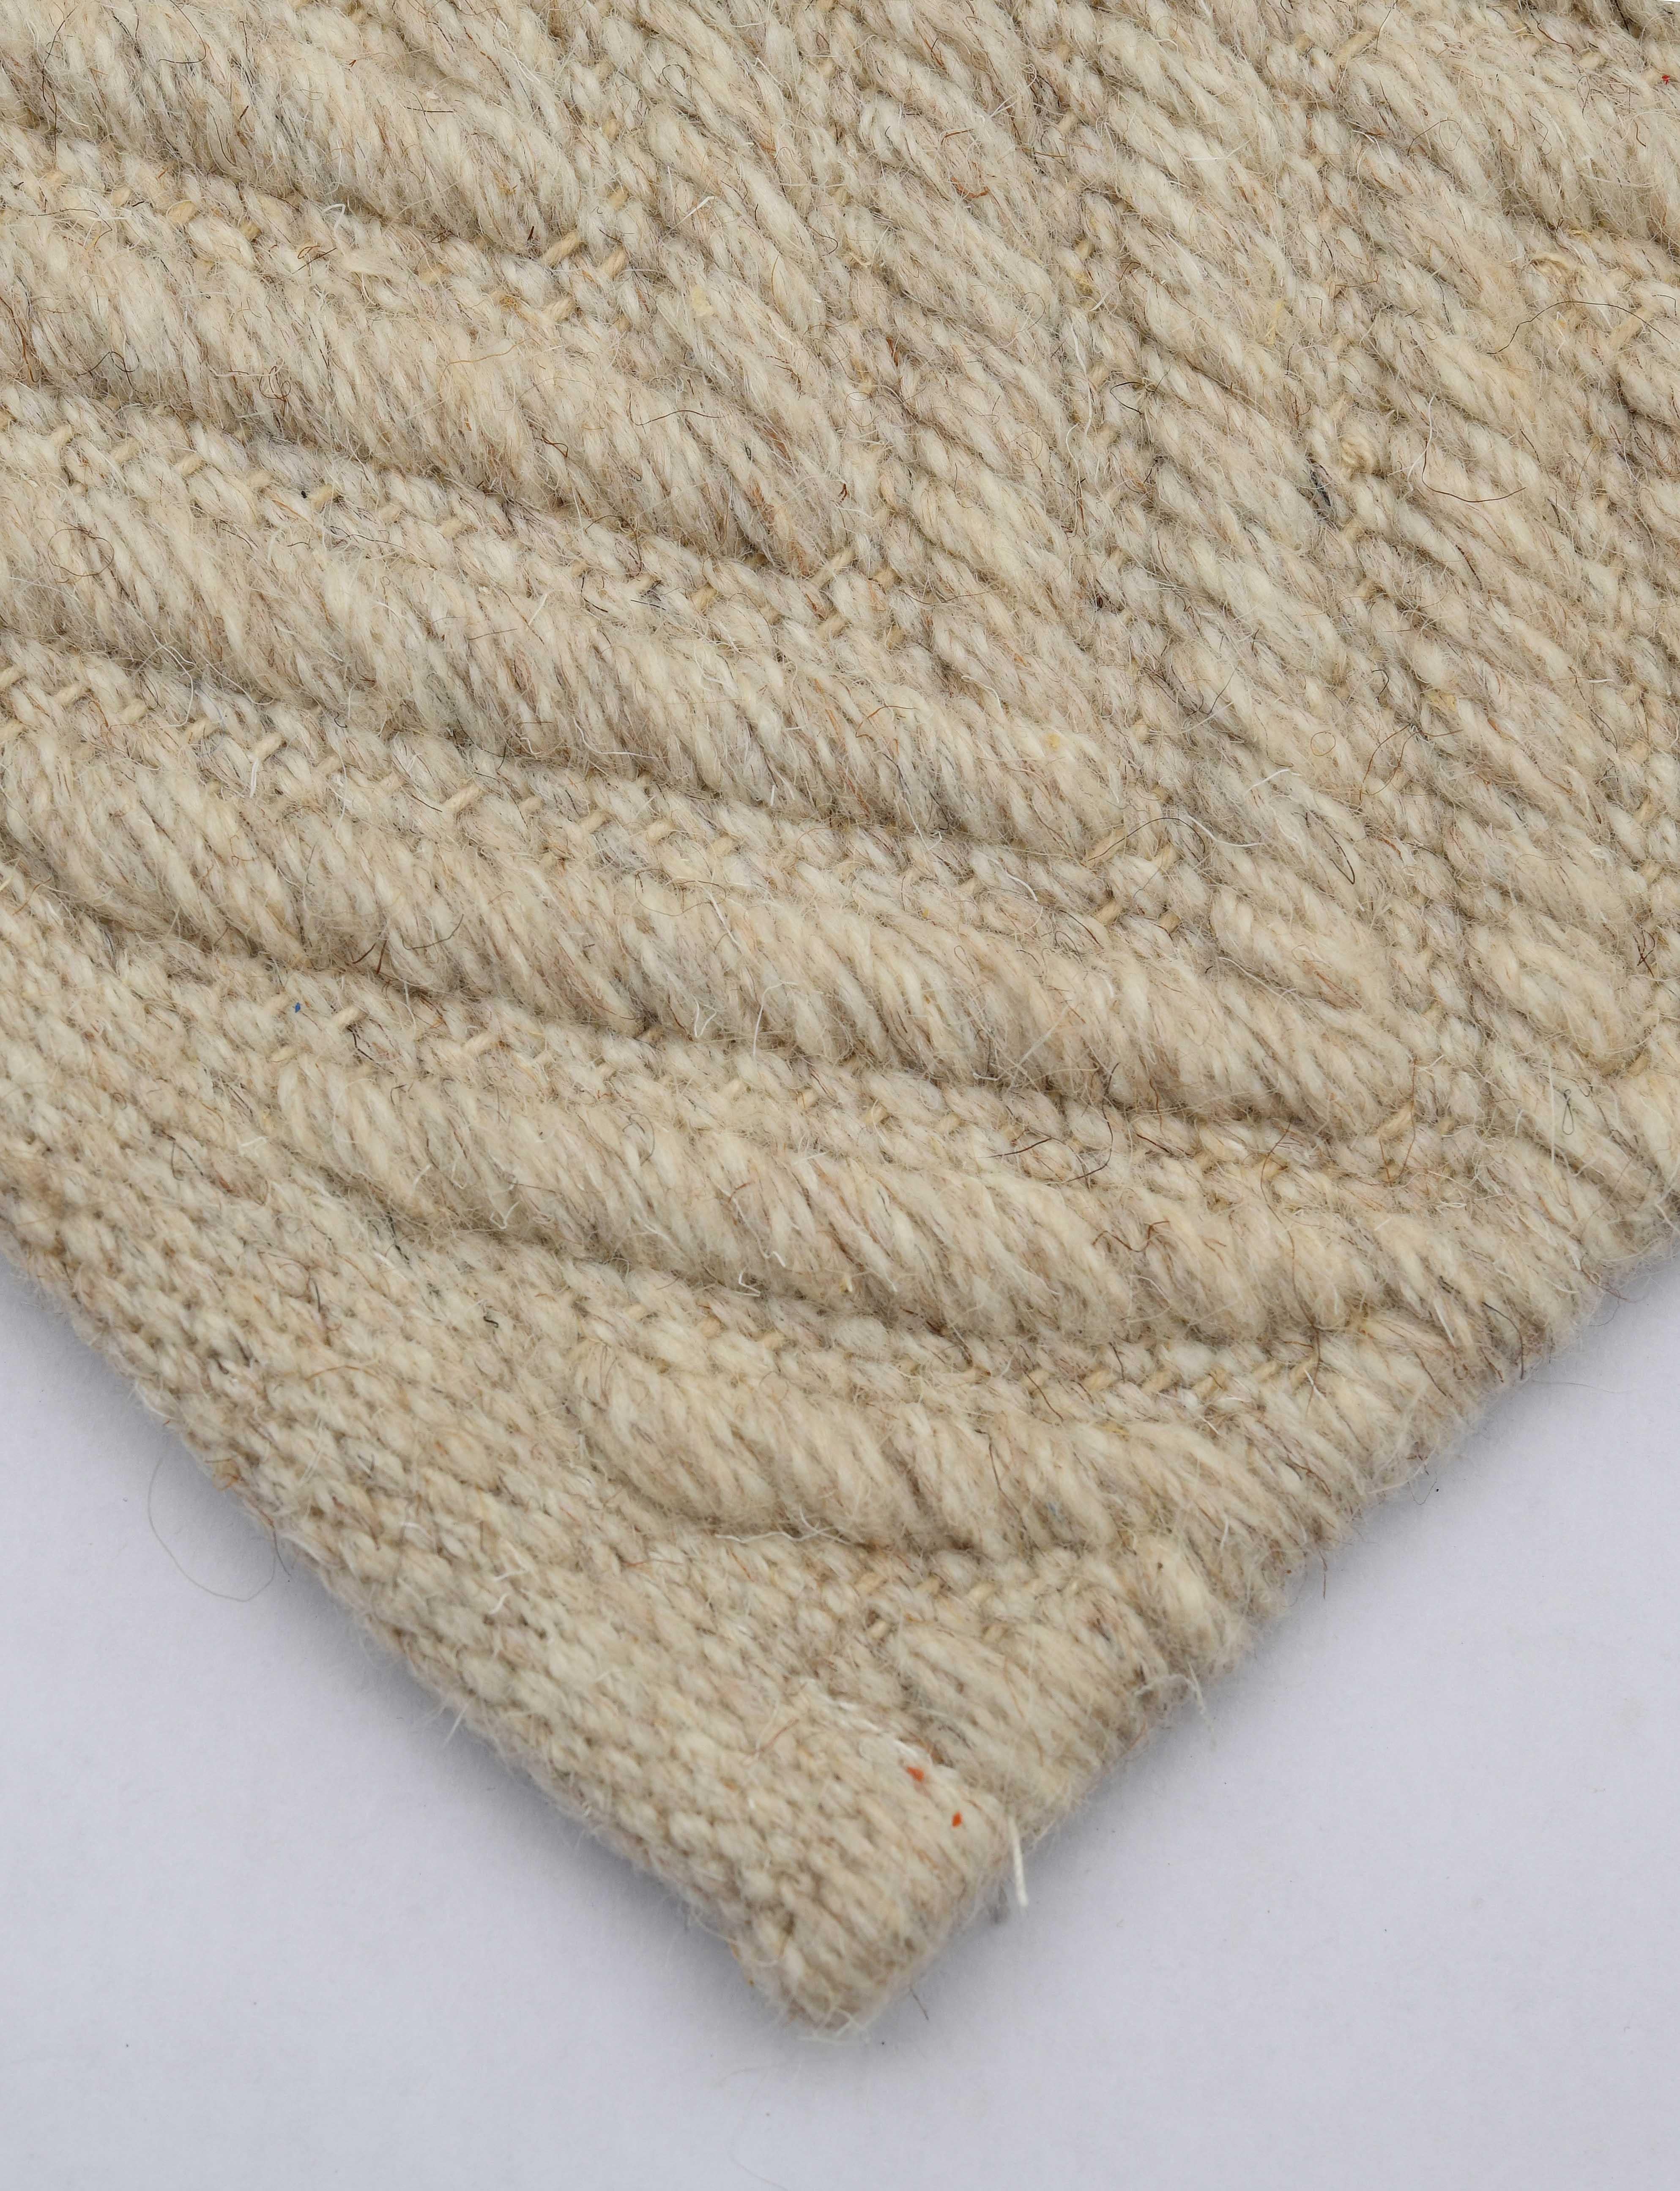 Hand-Woven Lanx, Beige, Handwoven Face 60% Undyed NZ Wool, 40% Undyed MED Wool, 8' x 10' For Sale